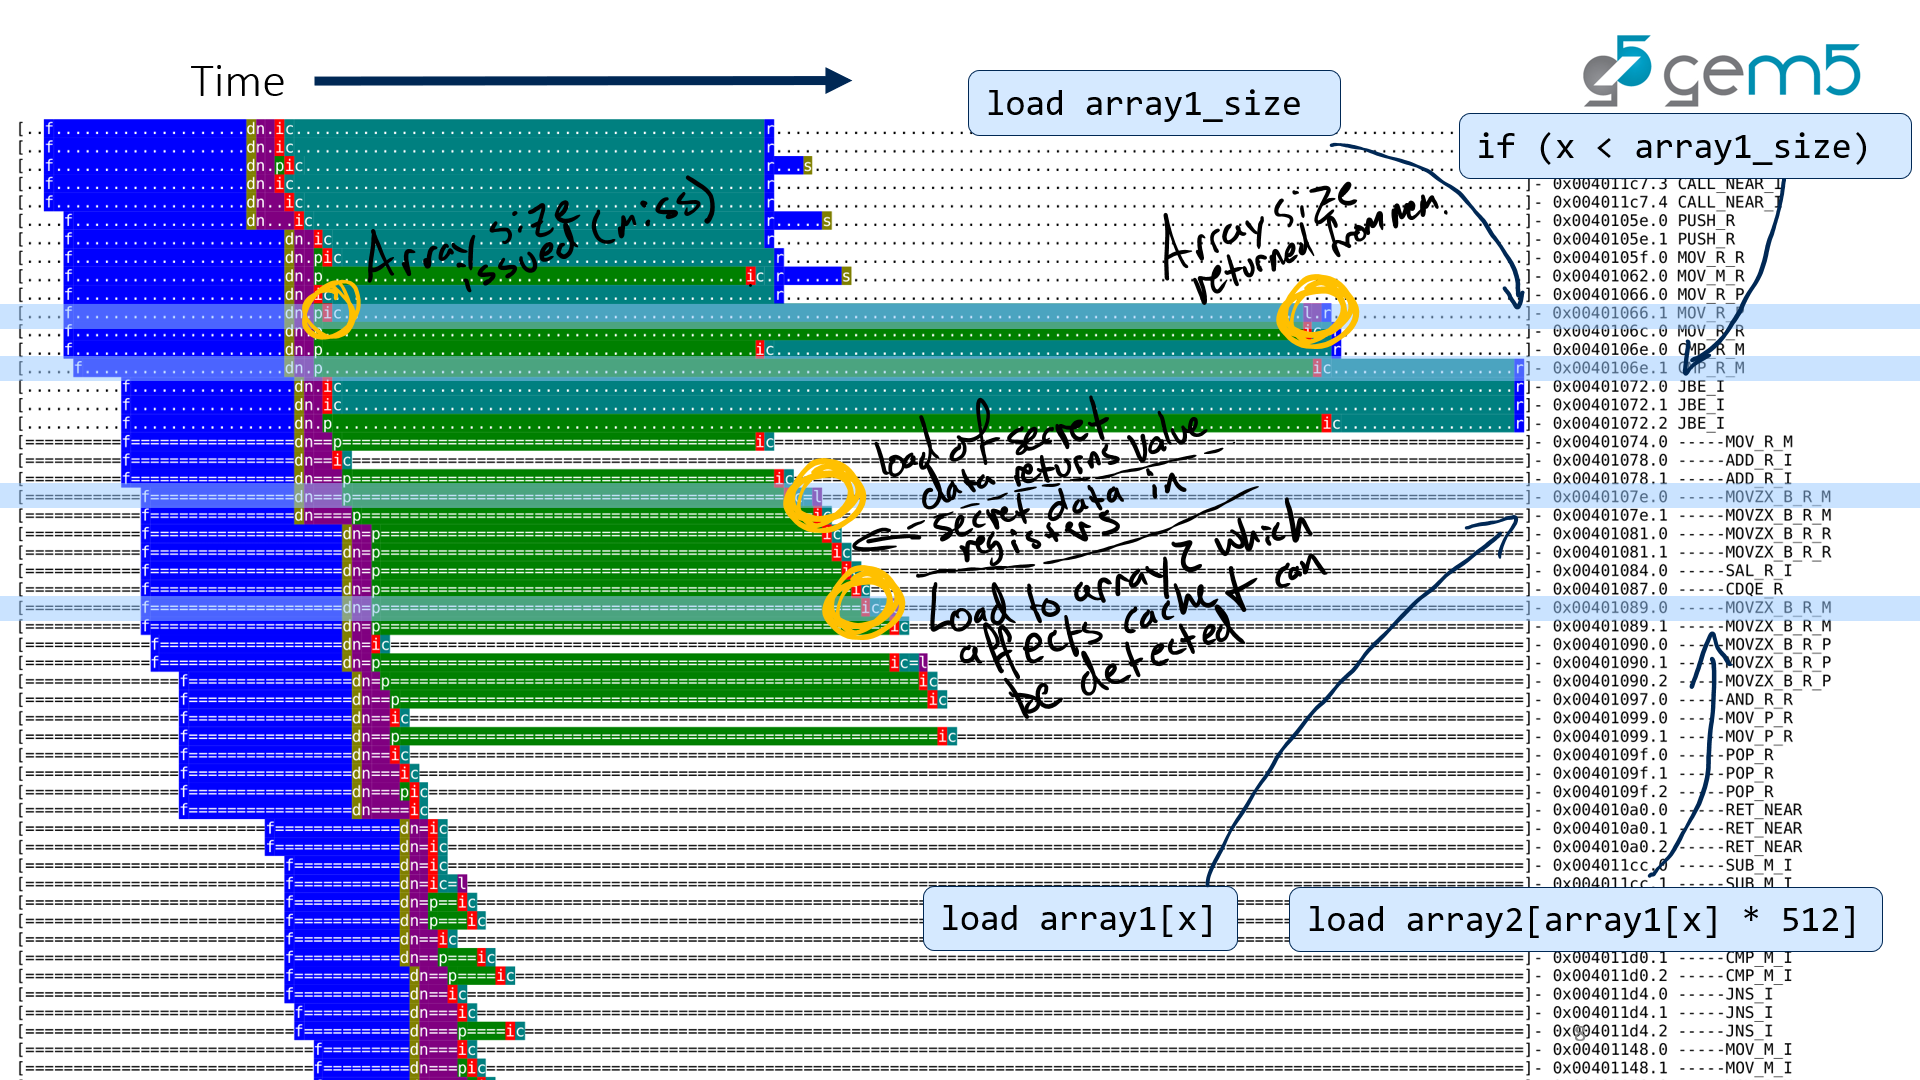 annotated O3 pipeline view of spectre